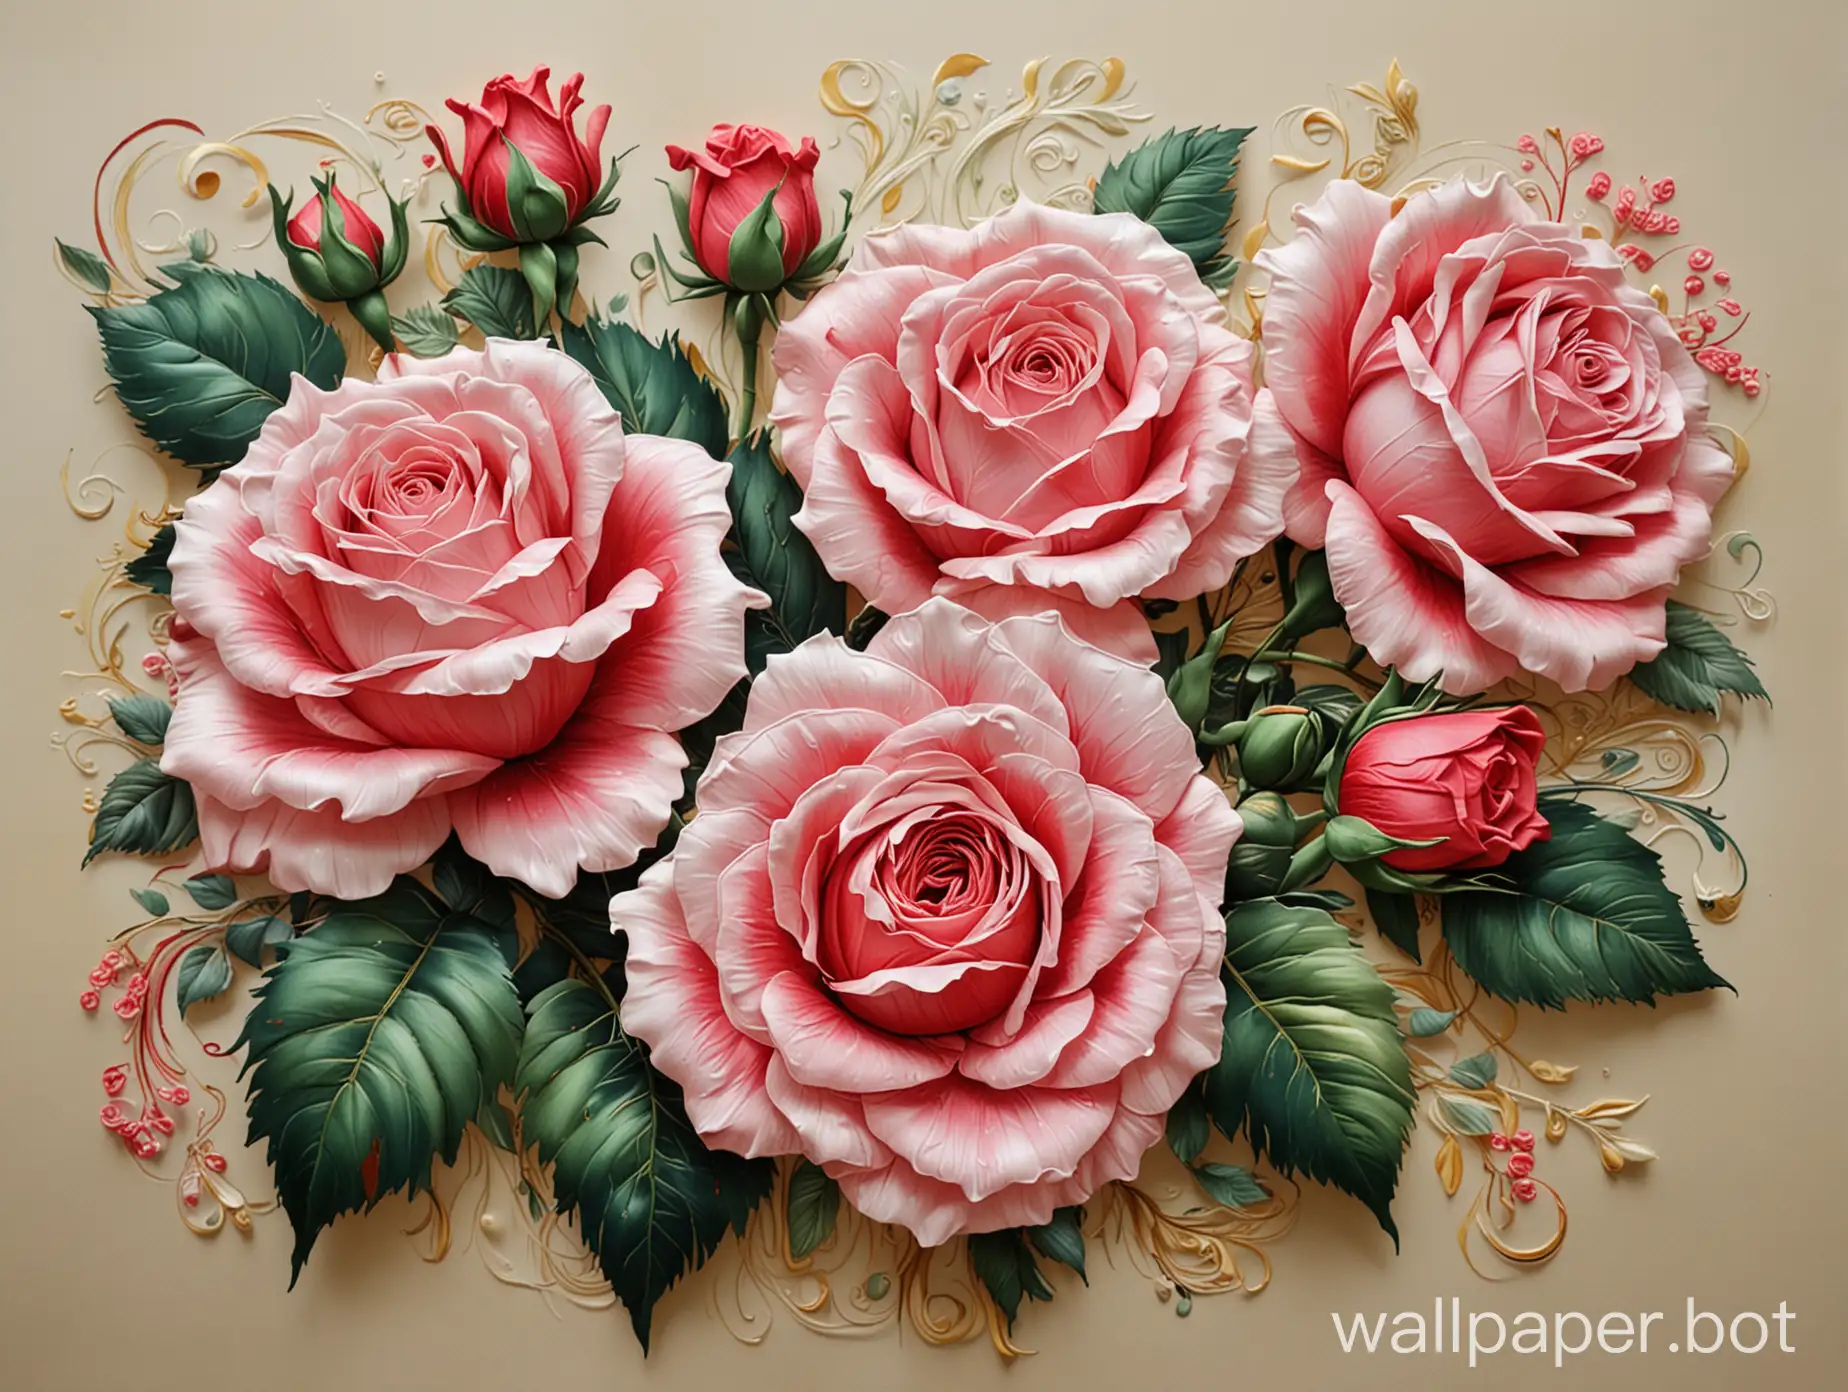 3D-Silk-Painting-of-Roses-in-Vibrant-Colors